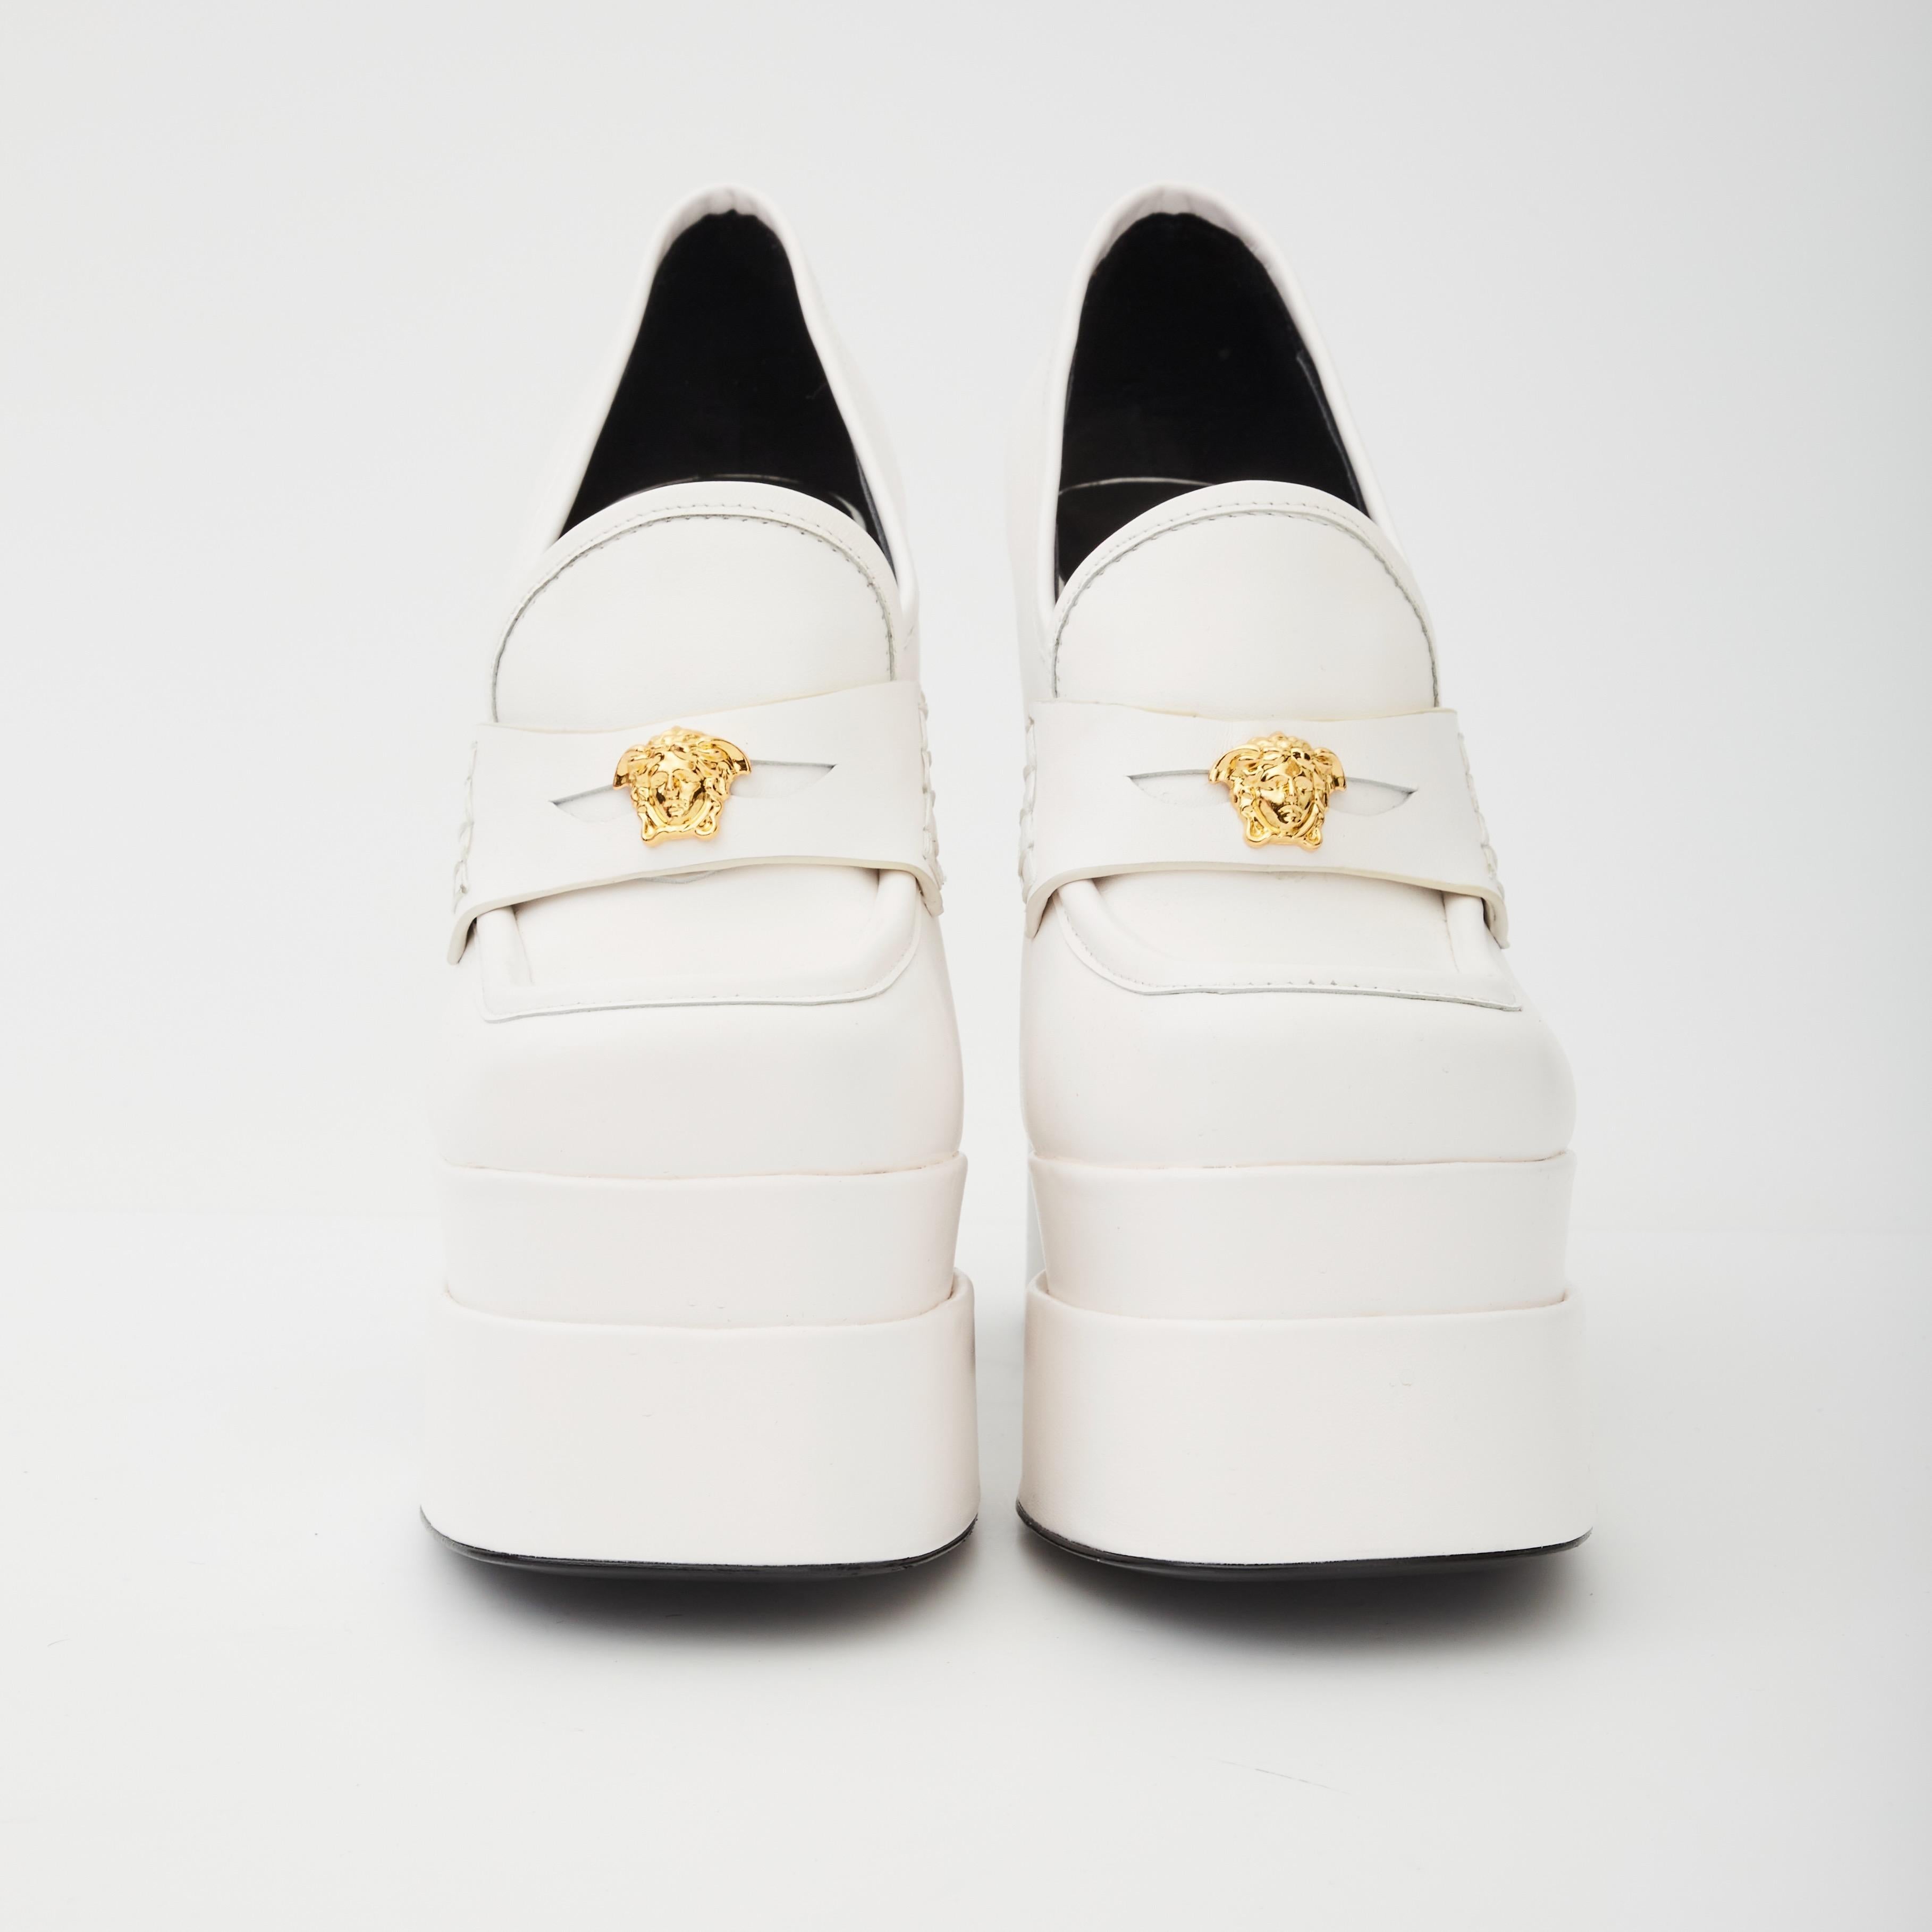 These Versace's Juno platform pumps feature a chunky silhouette, gold-tone Medusa plaque details, a leather composition, a platform sole, square toes and a white. color.

COLOR: White
MATERIAL: Leather
SIZE: 38 EU / 7 US
HEEL HEIGHT: 155 mm /